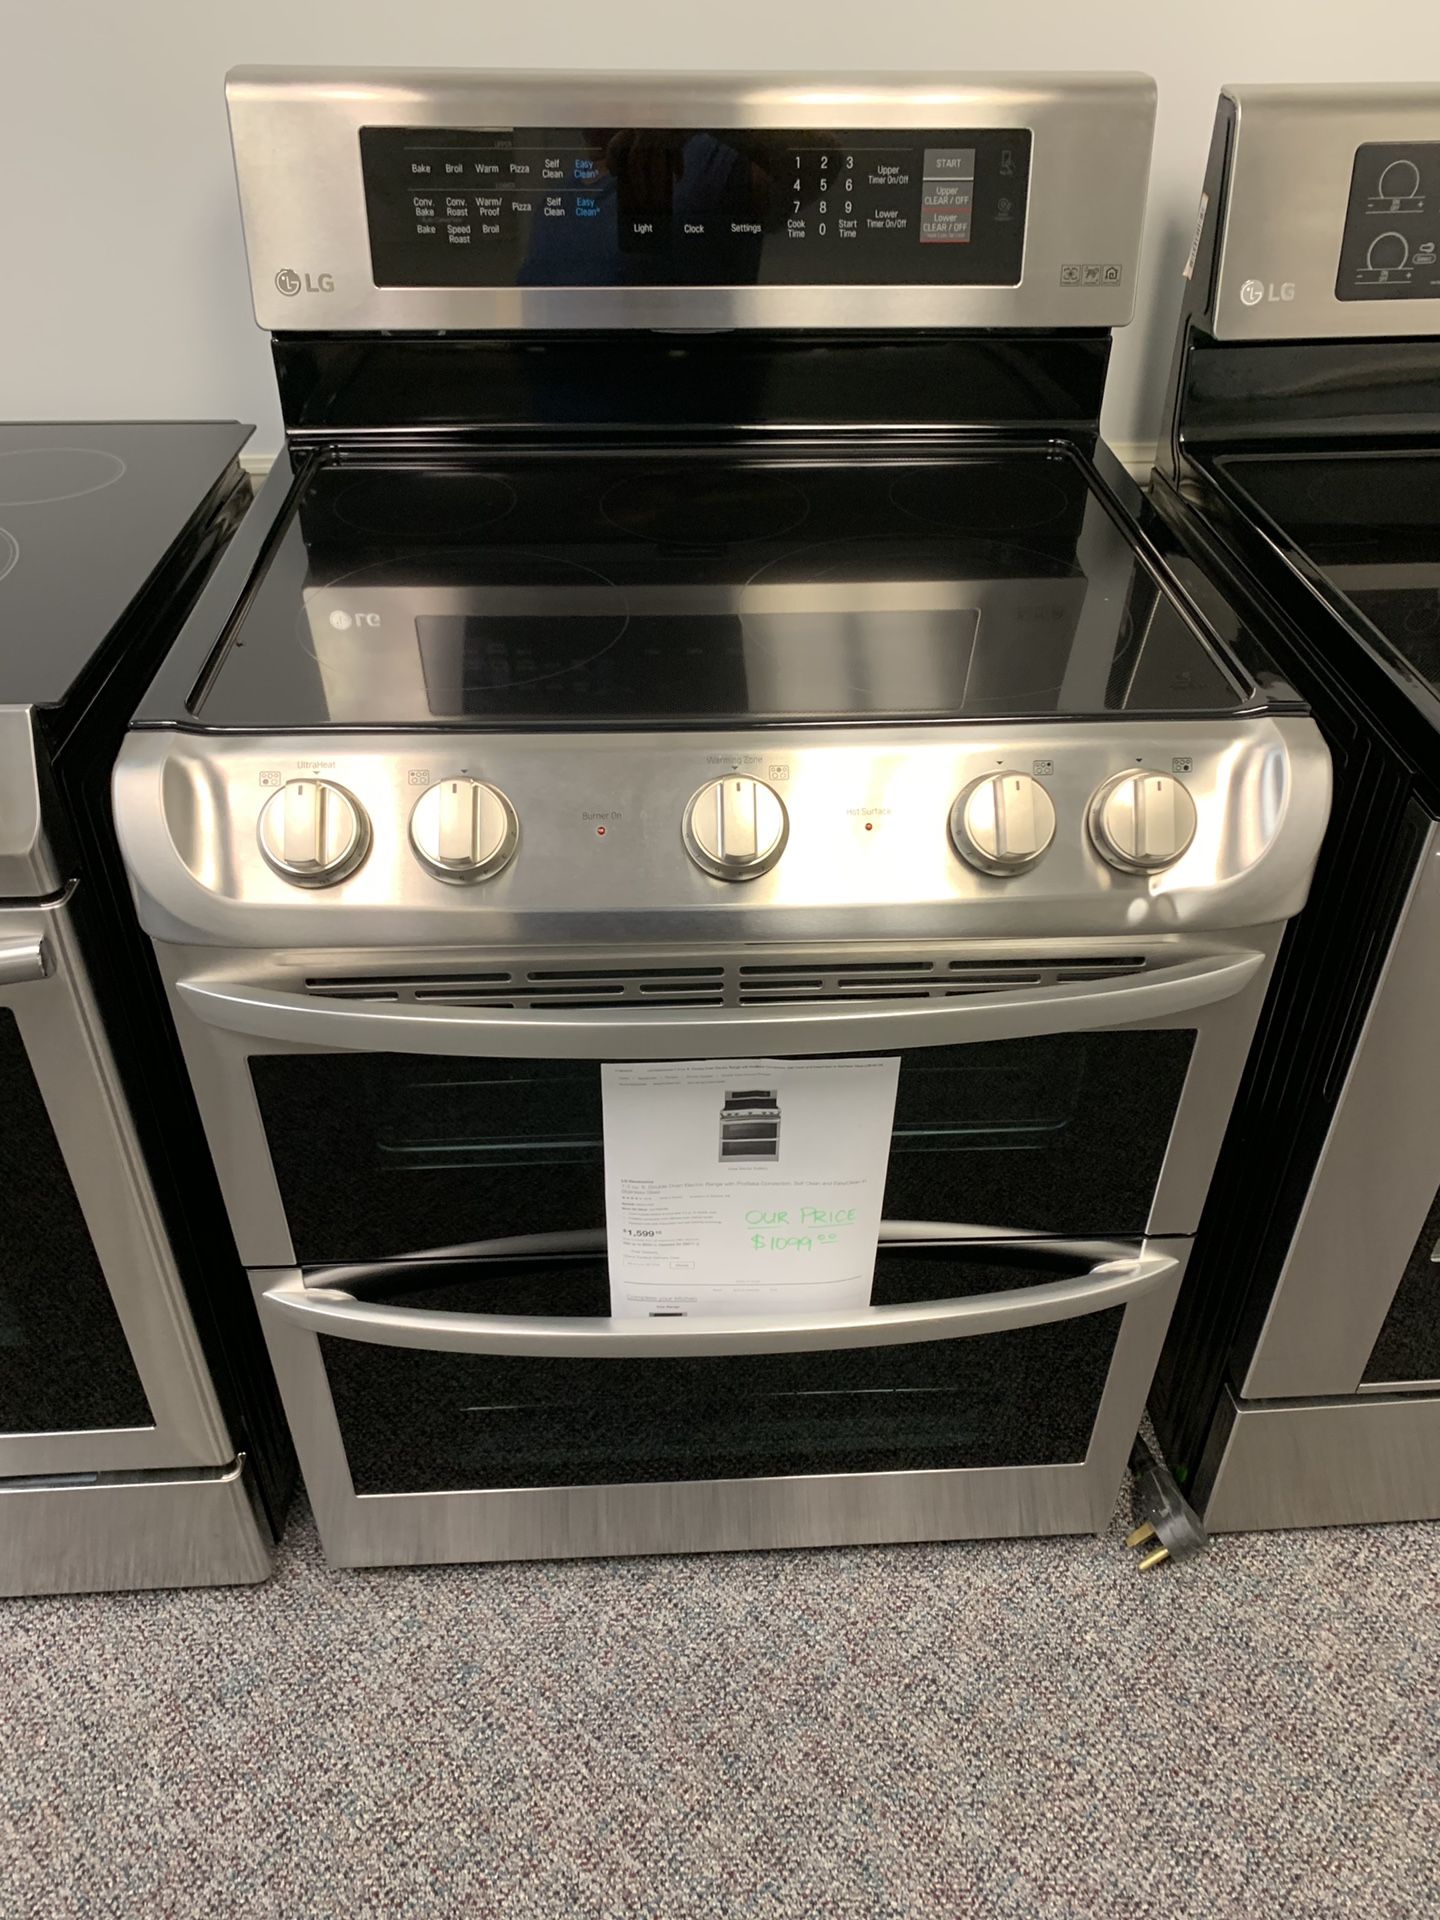 MEW SCRATCH AND DENT LG STAINLESS 5 BURNER GLASS TOP STOVE WITH DOUBLE CONVECTION OVEN